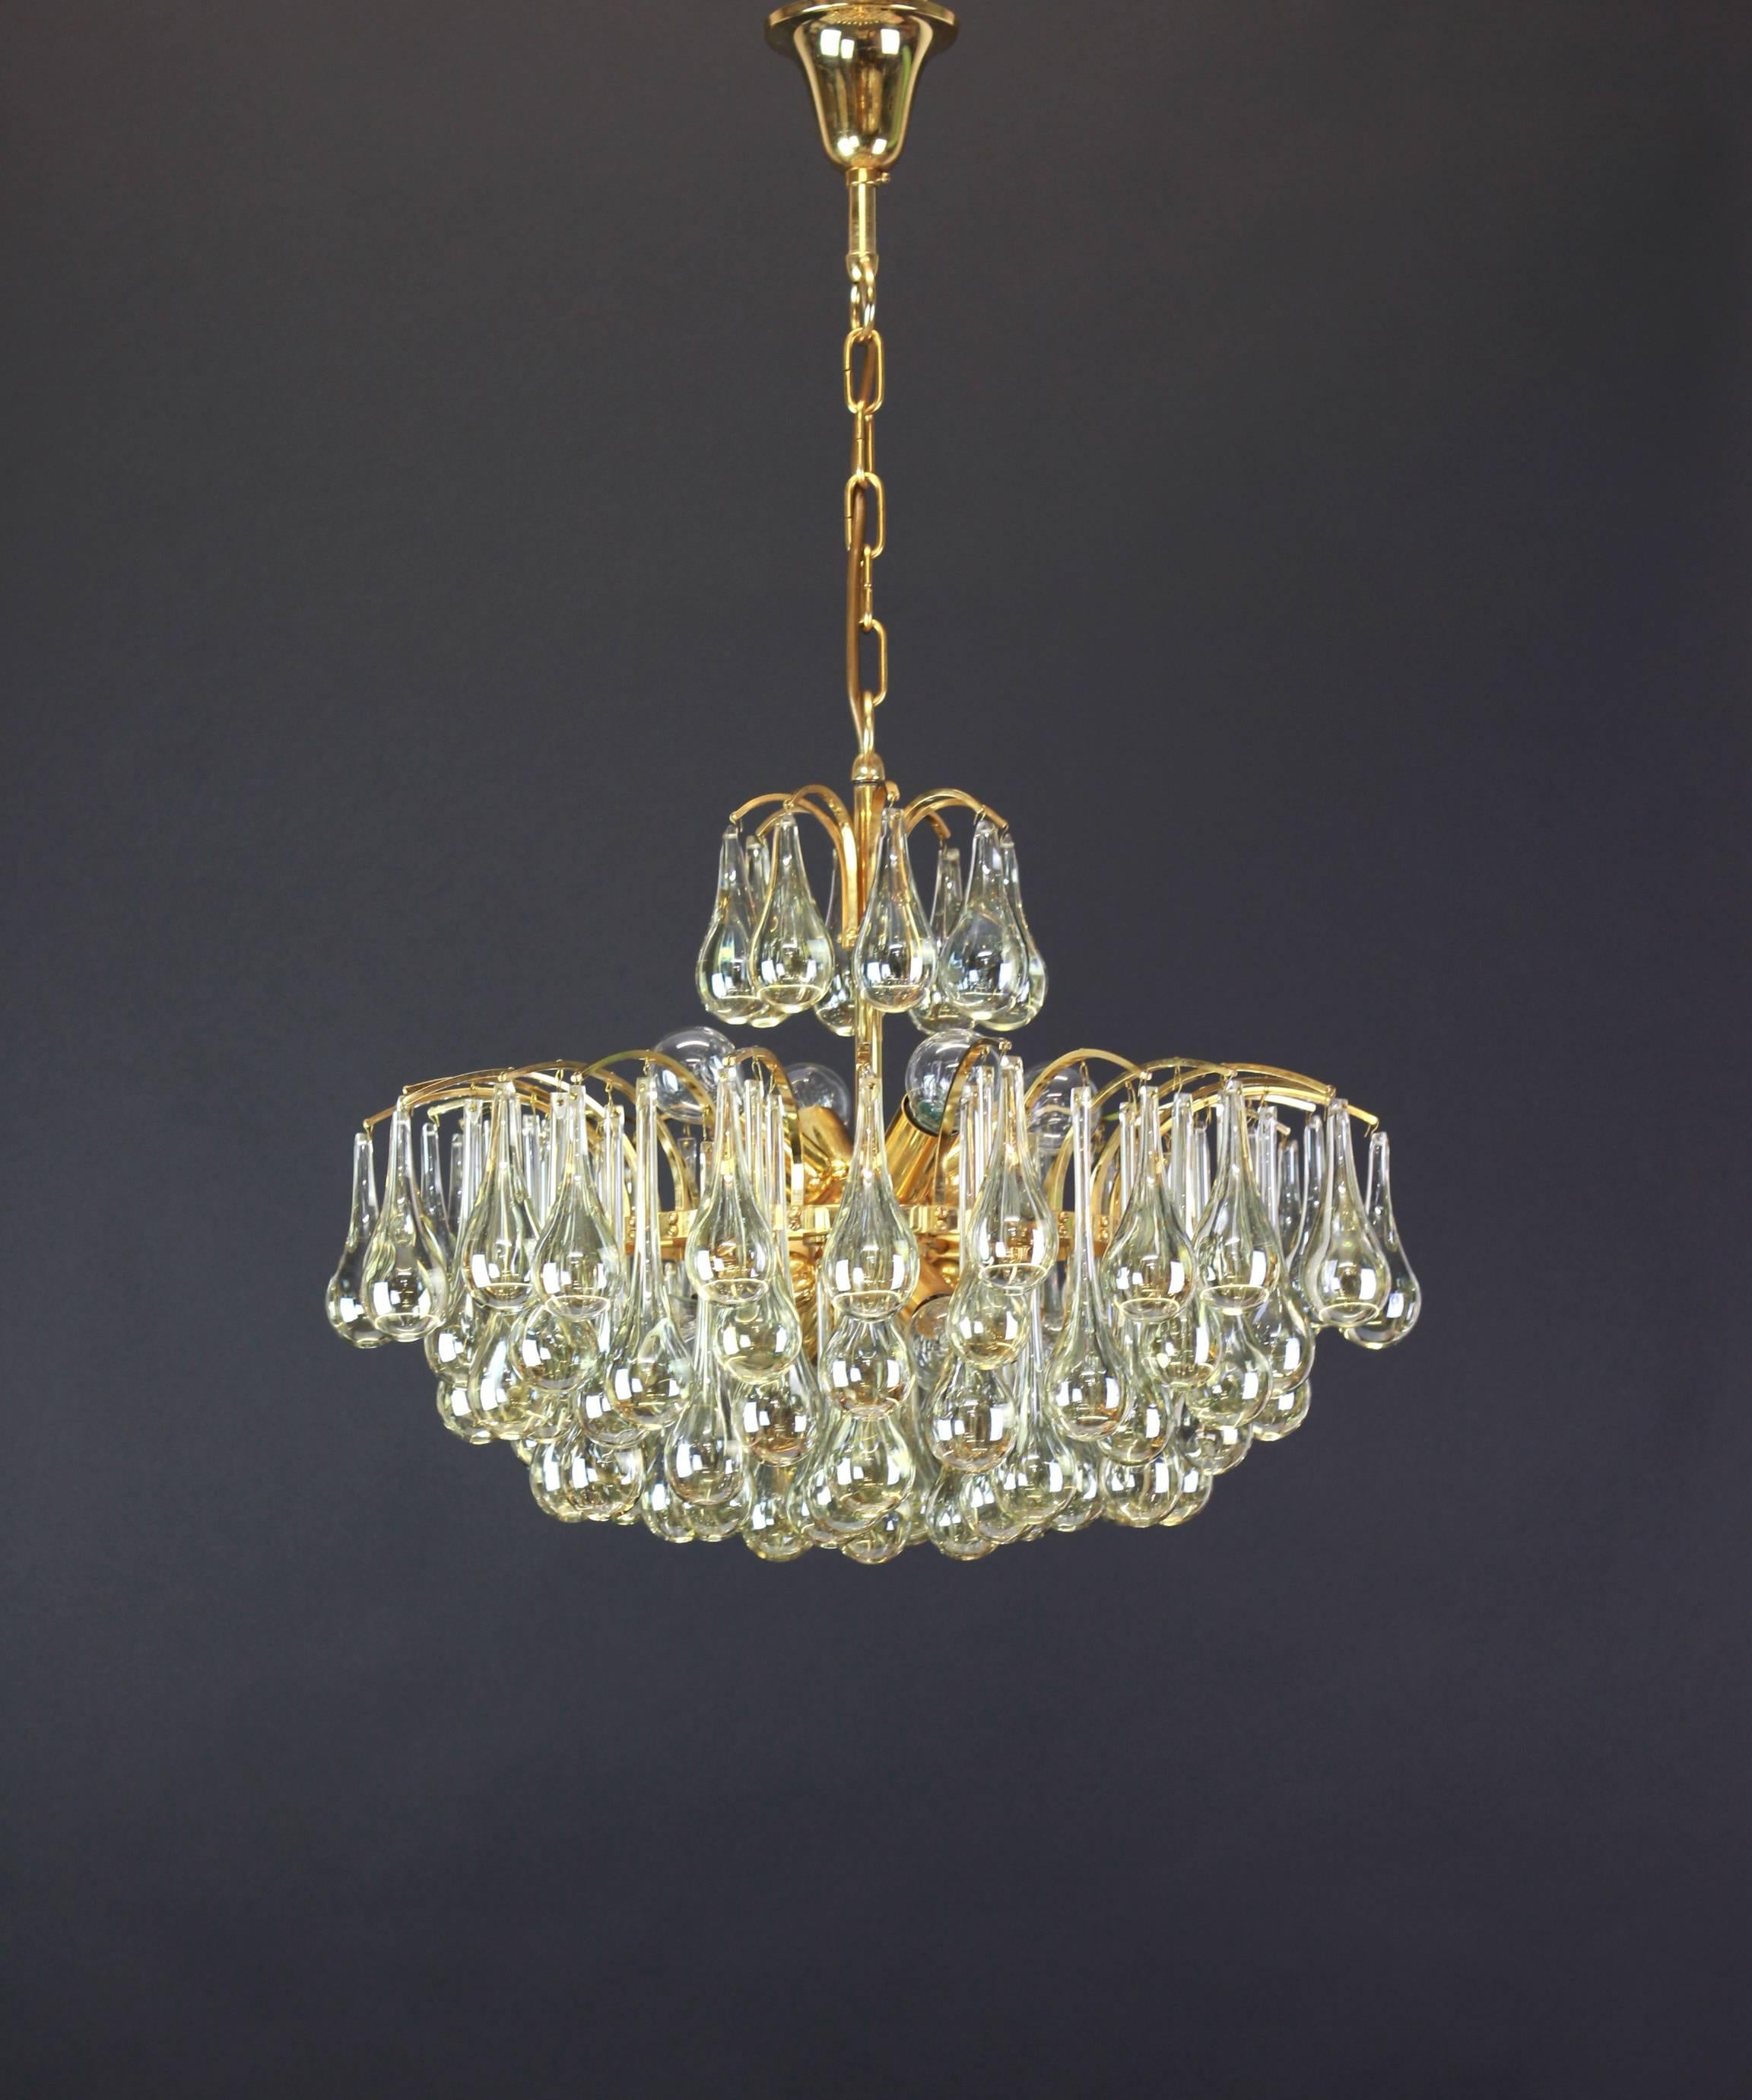 A stunning chandelier by Christoph Palme, Germany, manufactured in 1970s. It’s composed of Murano teardrop glass pieces on a gilded brass frame.

High quality and in very good condition. Cleaned, well-wired and ready to use. 

The fixture